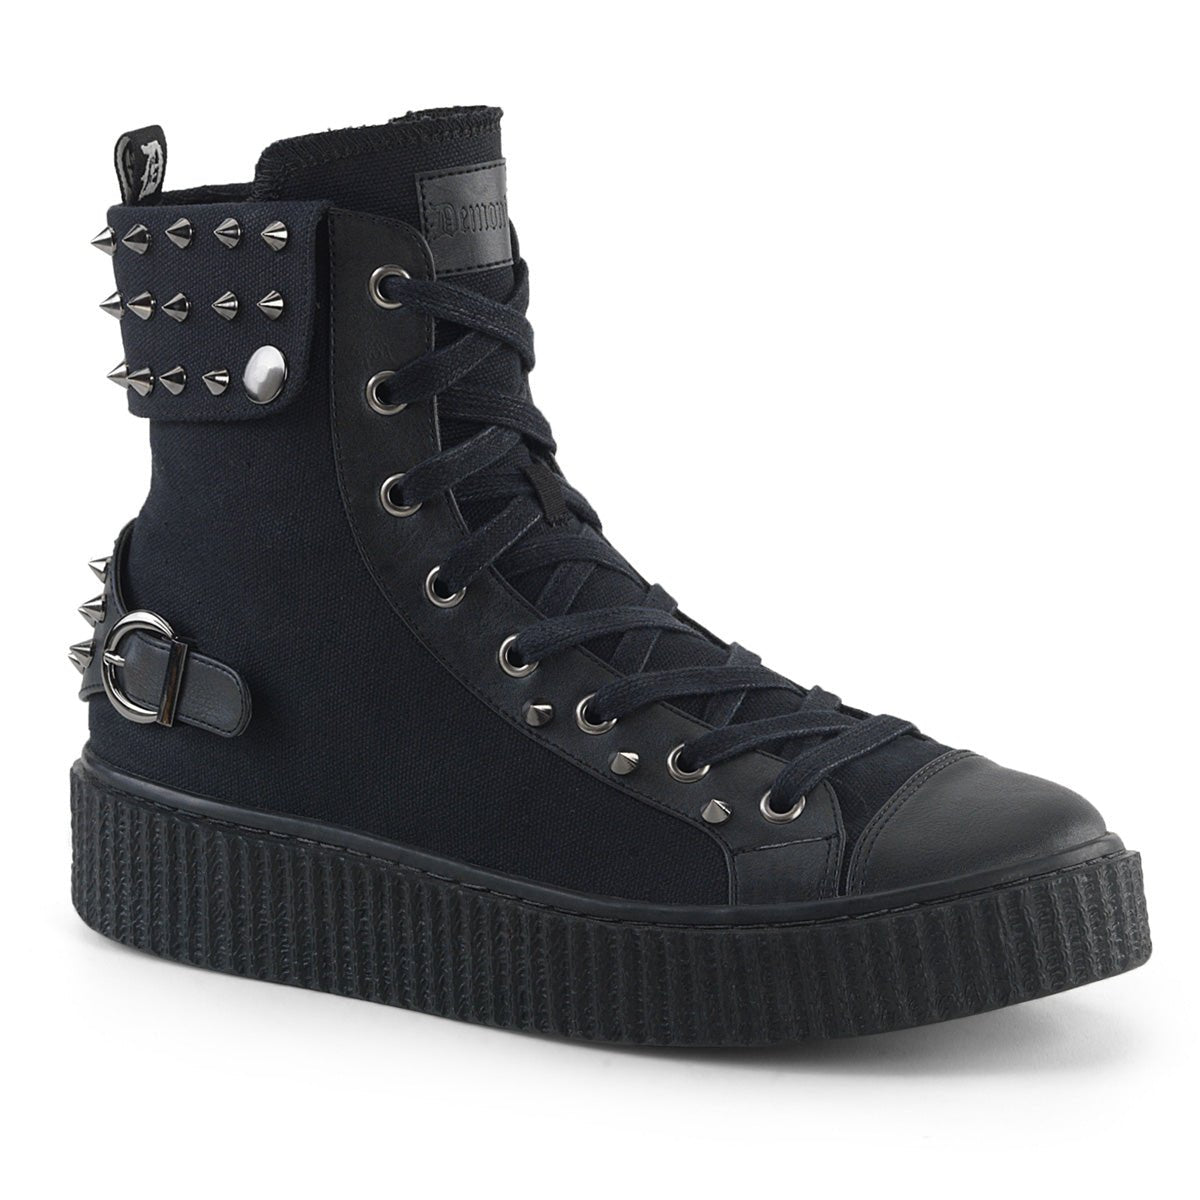 Demonia Boots and Creepers | Demonias Sold at Too Fast – Page 5